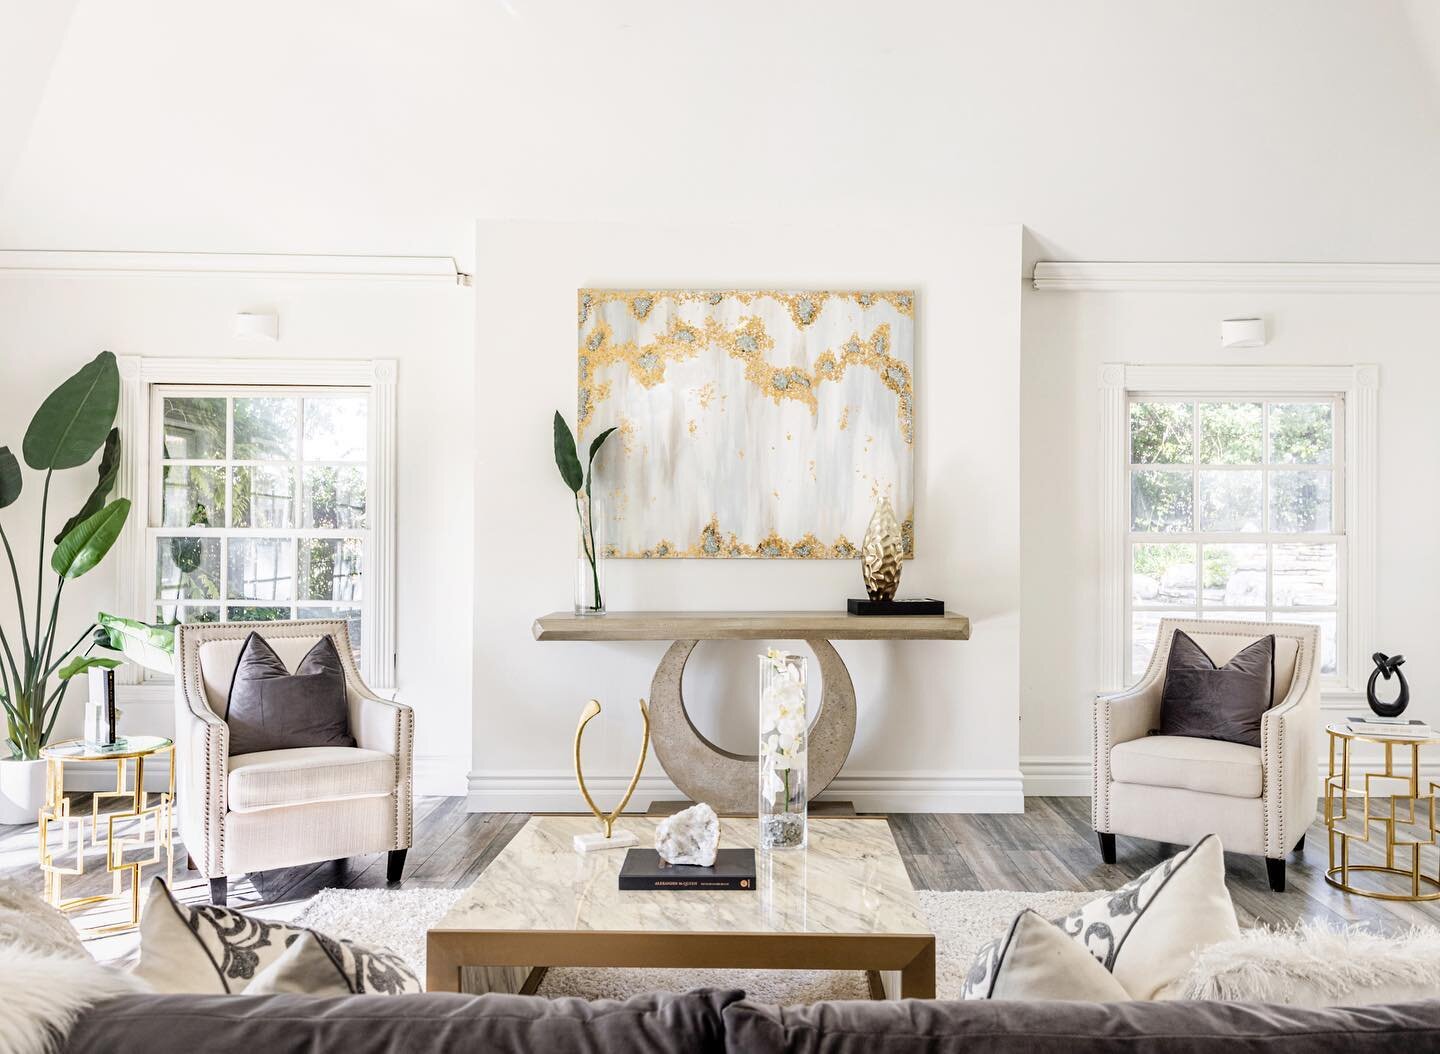 Rich, elegant, and refined&mdash;classic, yet contemporary. That&rsquo;s how we bring the best to life in your property 🤍
&bull;
&bull;
&bull;

#homestaging #interiordesign #homedecor #realestate #home #interior #design #staging #homestager #homedes